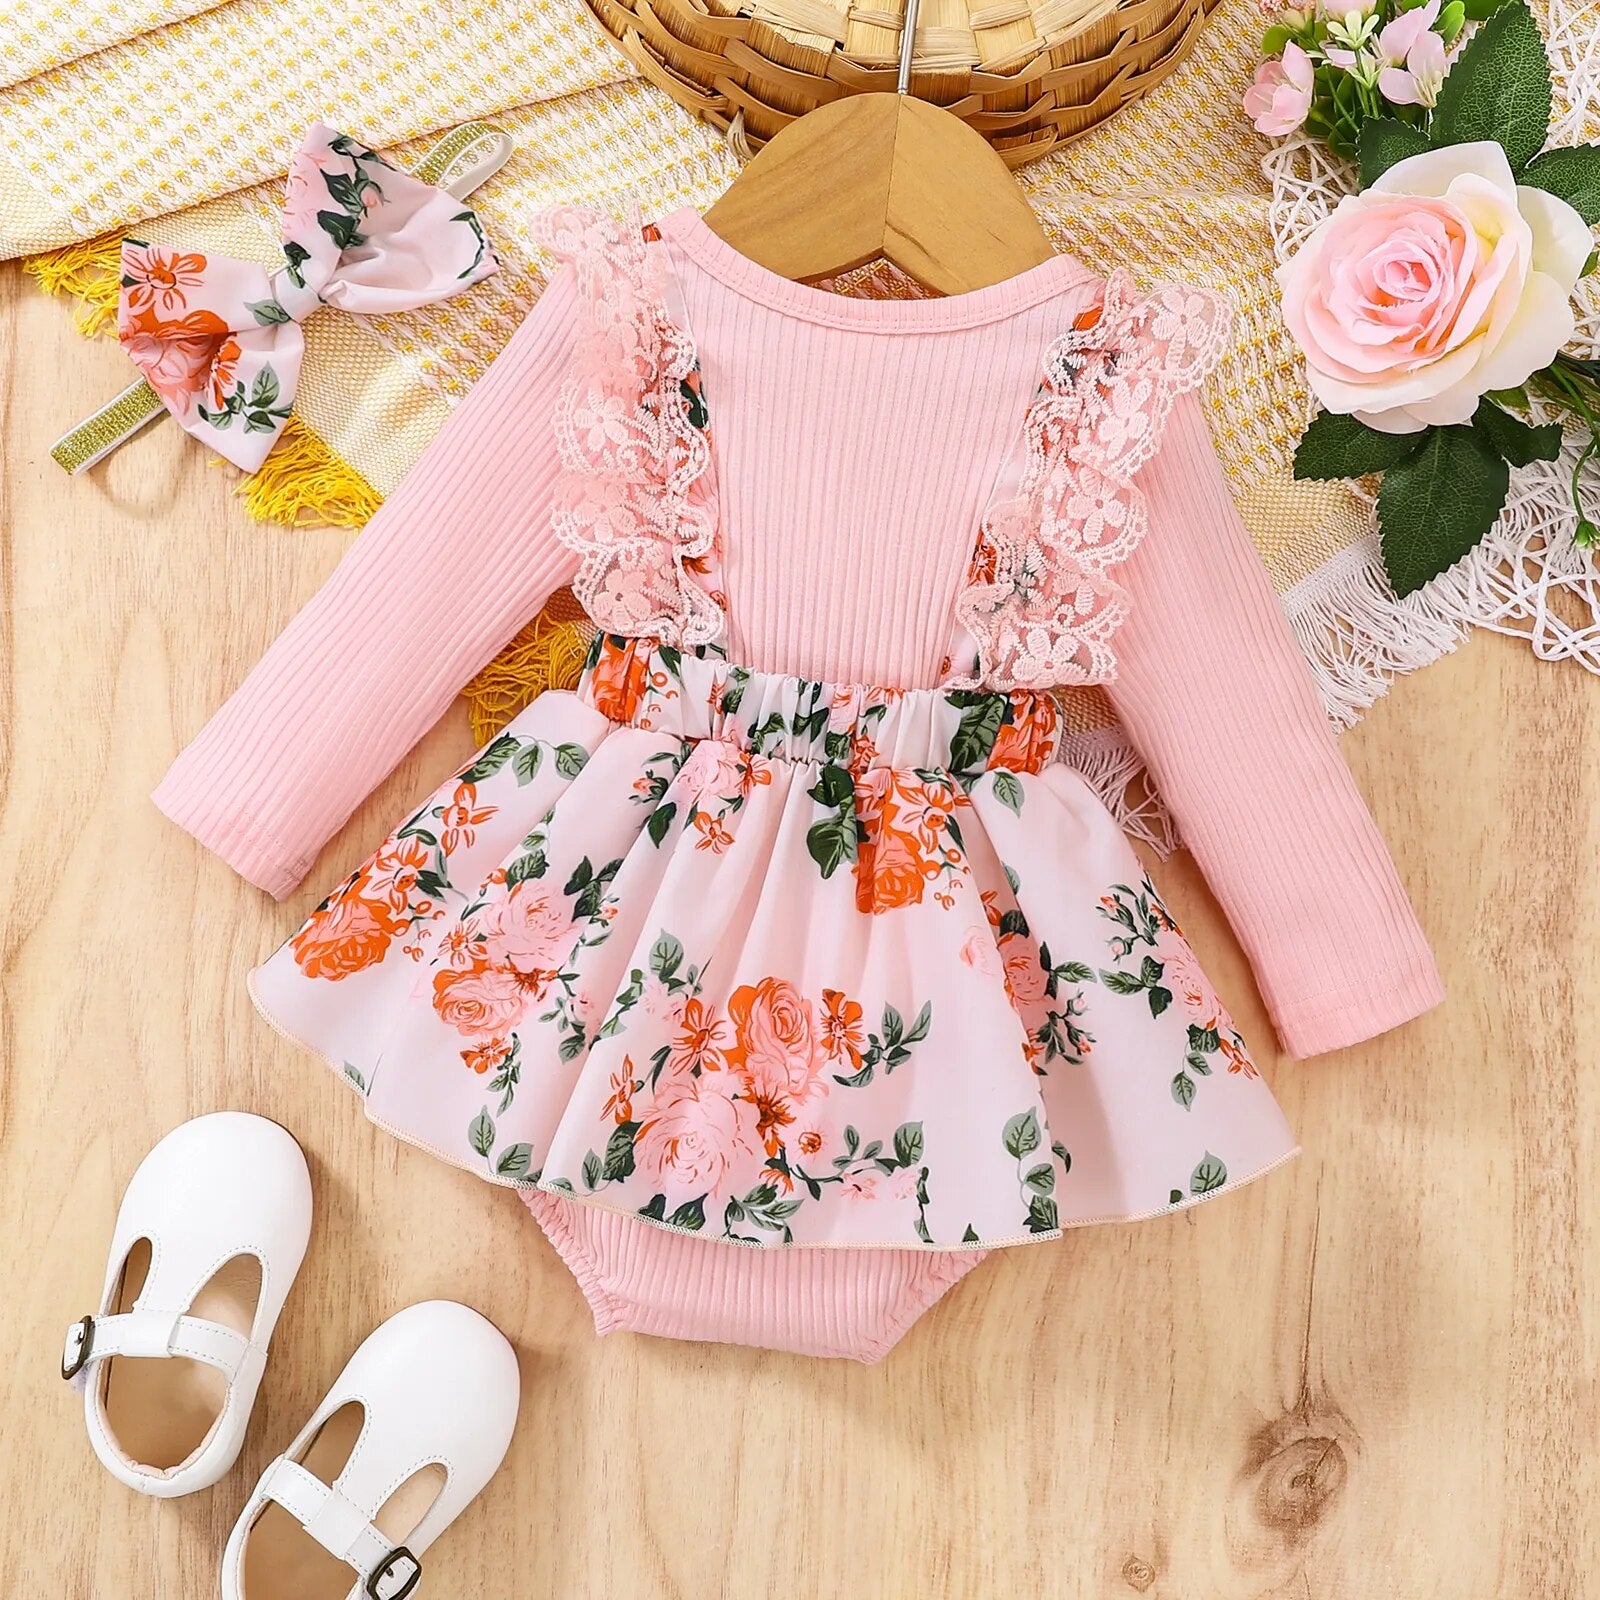 Buy Baywell Baby Girl Clothes Cute Lace Up Long Print Romper